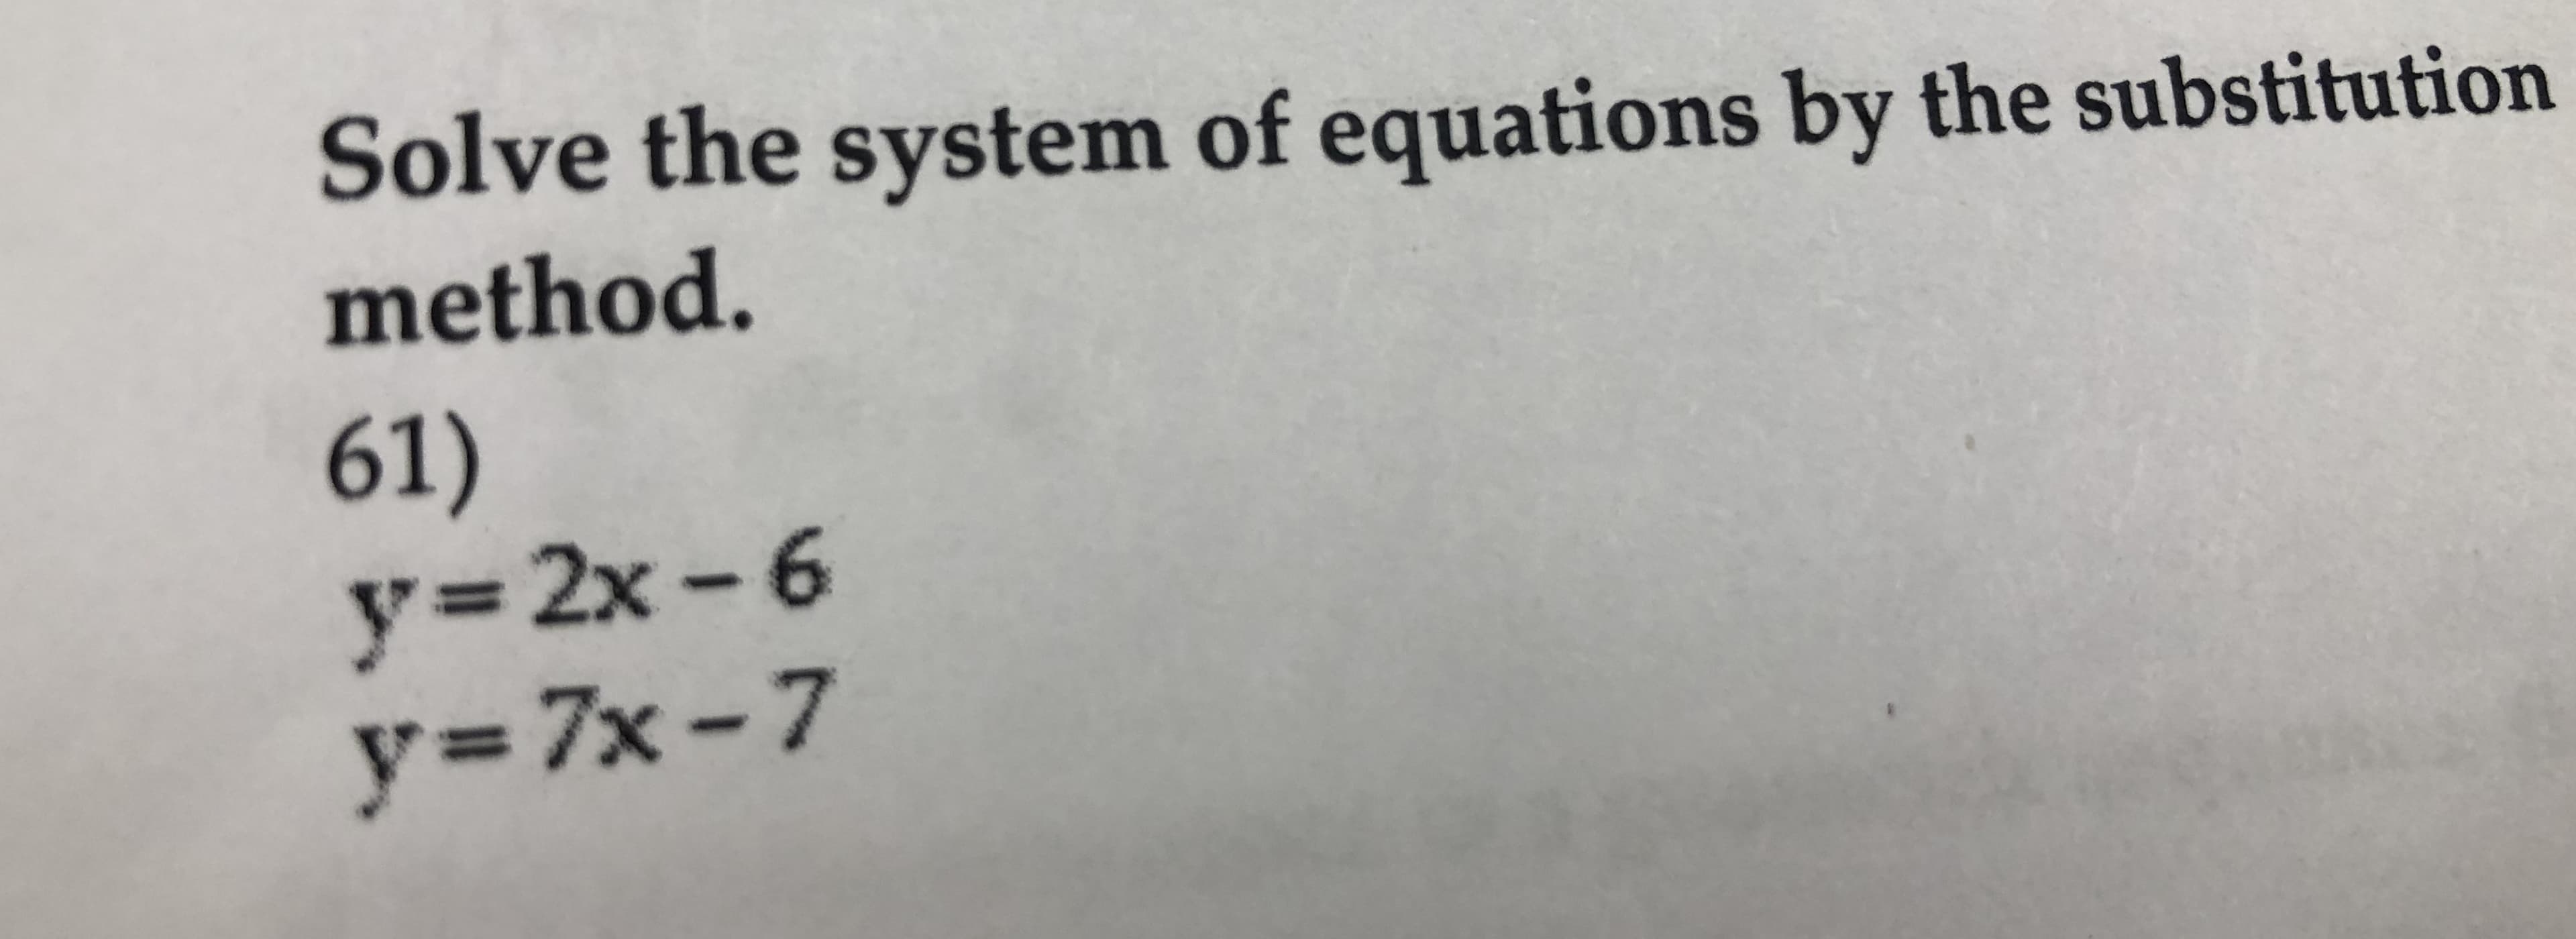 Solve the system of equations by the substitution
method.
61)
y-7x-7
